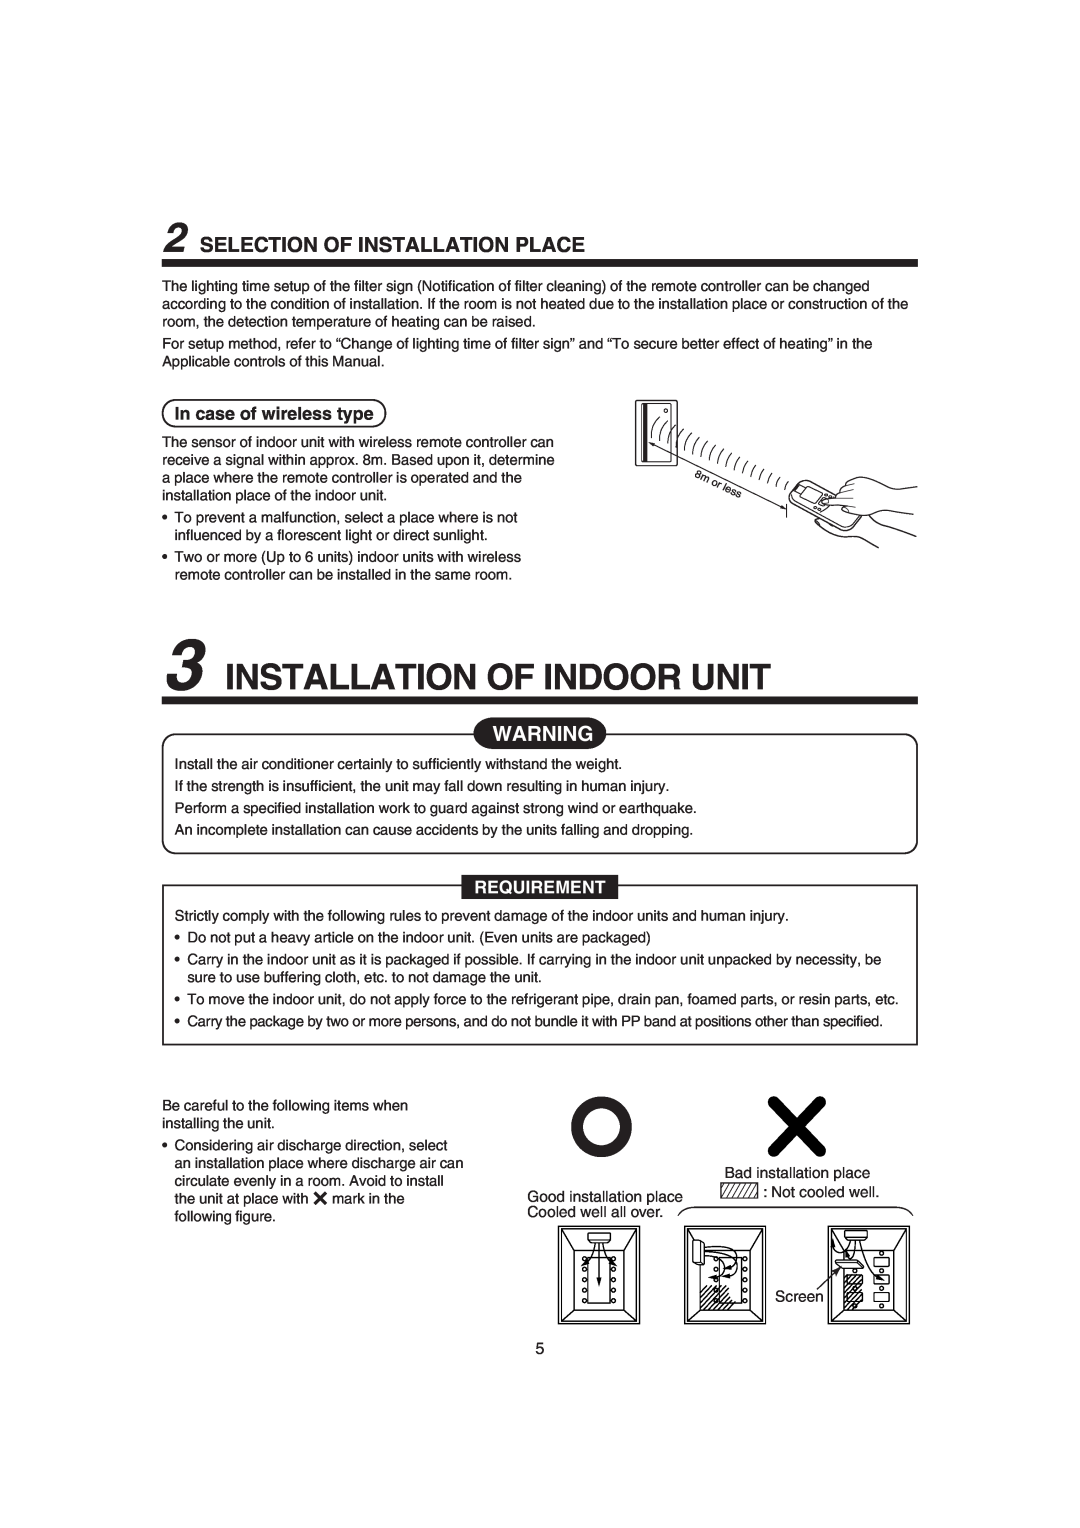 Pentax MMK-AP0071H Installation Of Indoor Unit, Selection Of Installation Place, In case of wireless type, Requirement 